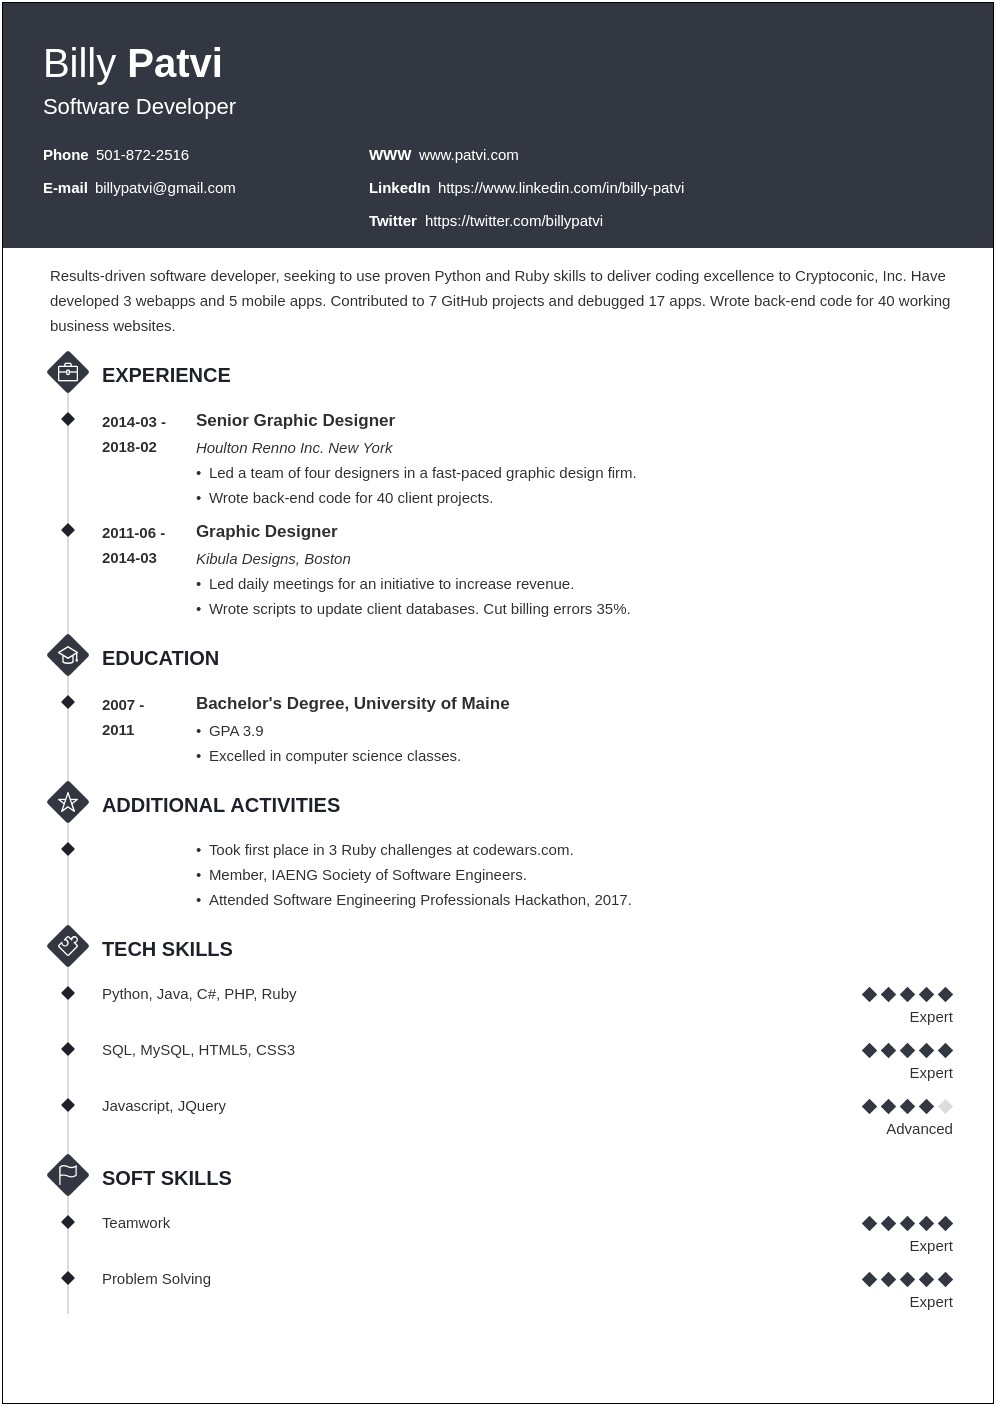 Objective For Career Progression In Resume